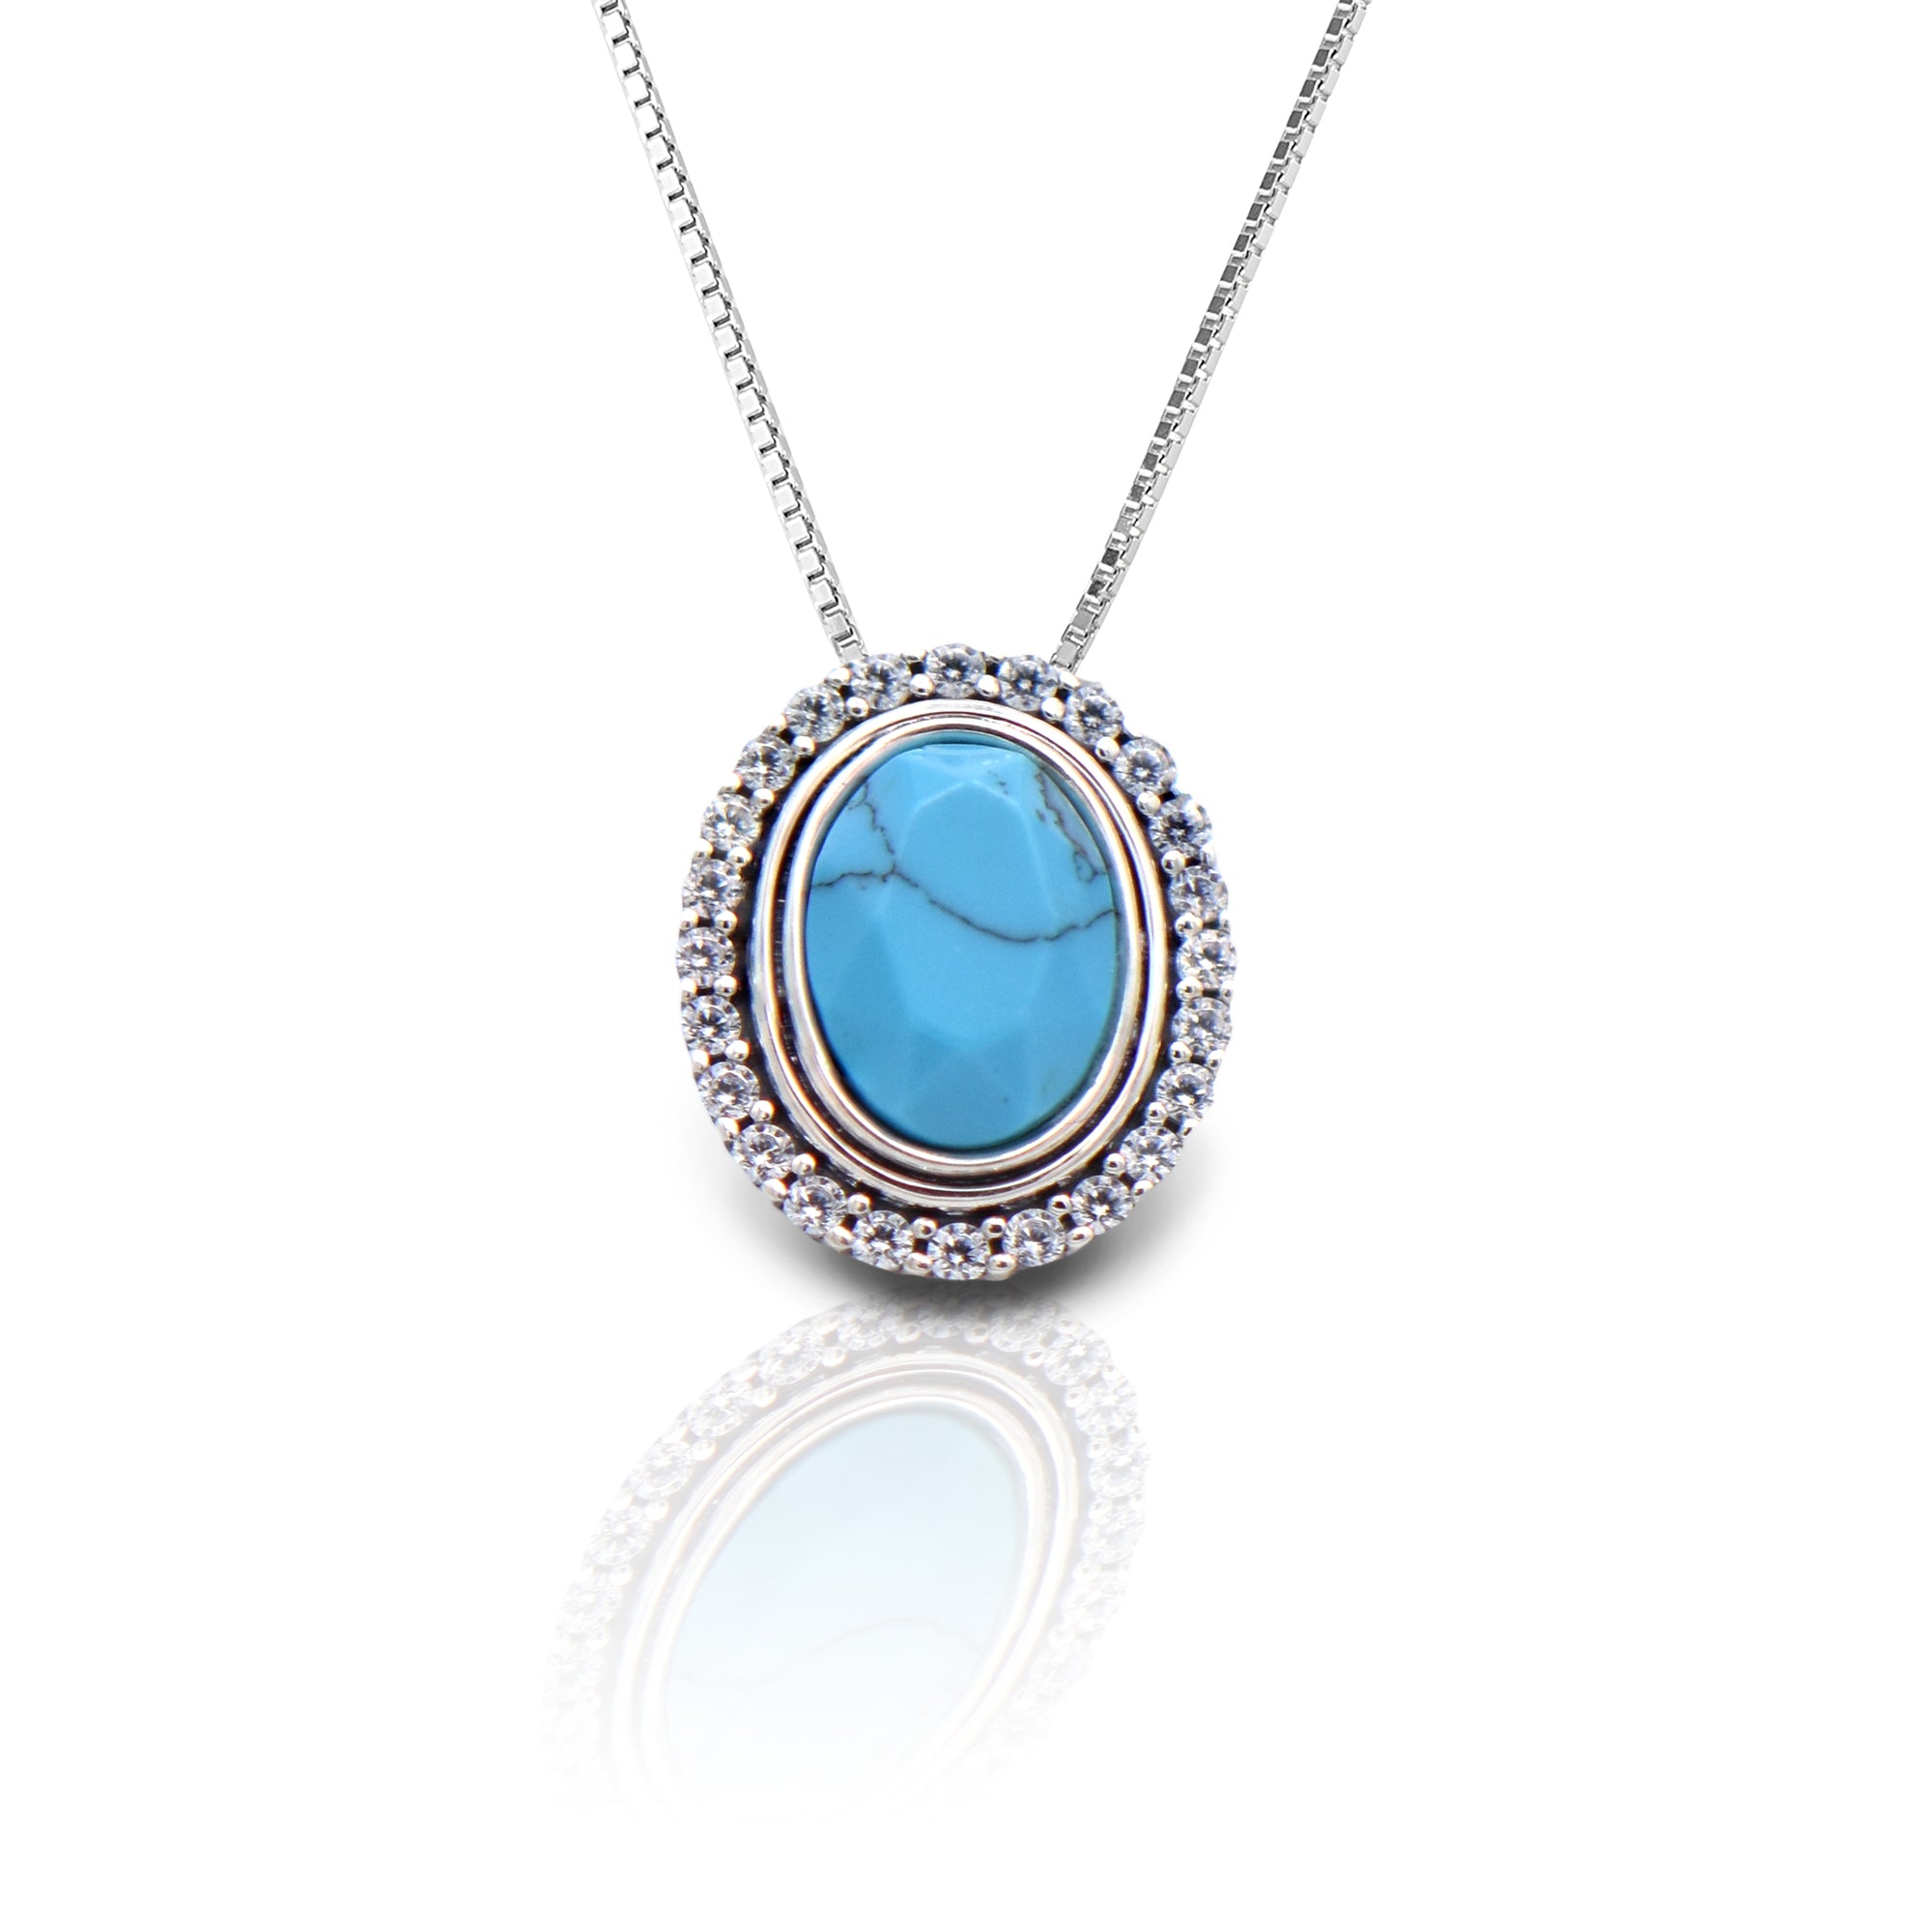 The Kelly Herd Oval Turquoise Pendant Necklace is the perfect compliment to any Western look. Whether it's a night celebrating on Sundance Square or boot scootin' down Broadway this piece will complete any ensemble. Comes with a 16"-18" adjustable box chain.  Features      Western Oval Design     Lab Turquoise Stones Enhanced with Cubic Zirconia      Measures 17mm high x 14mm wide     16"-18" Adjustable Box Chain     Matching Earrings Available     Sterling Silver